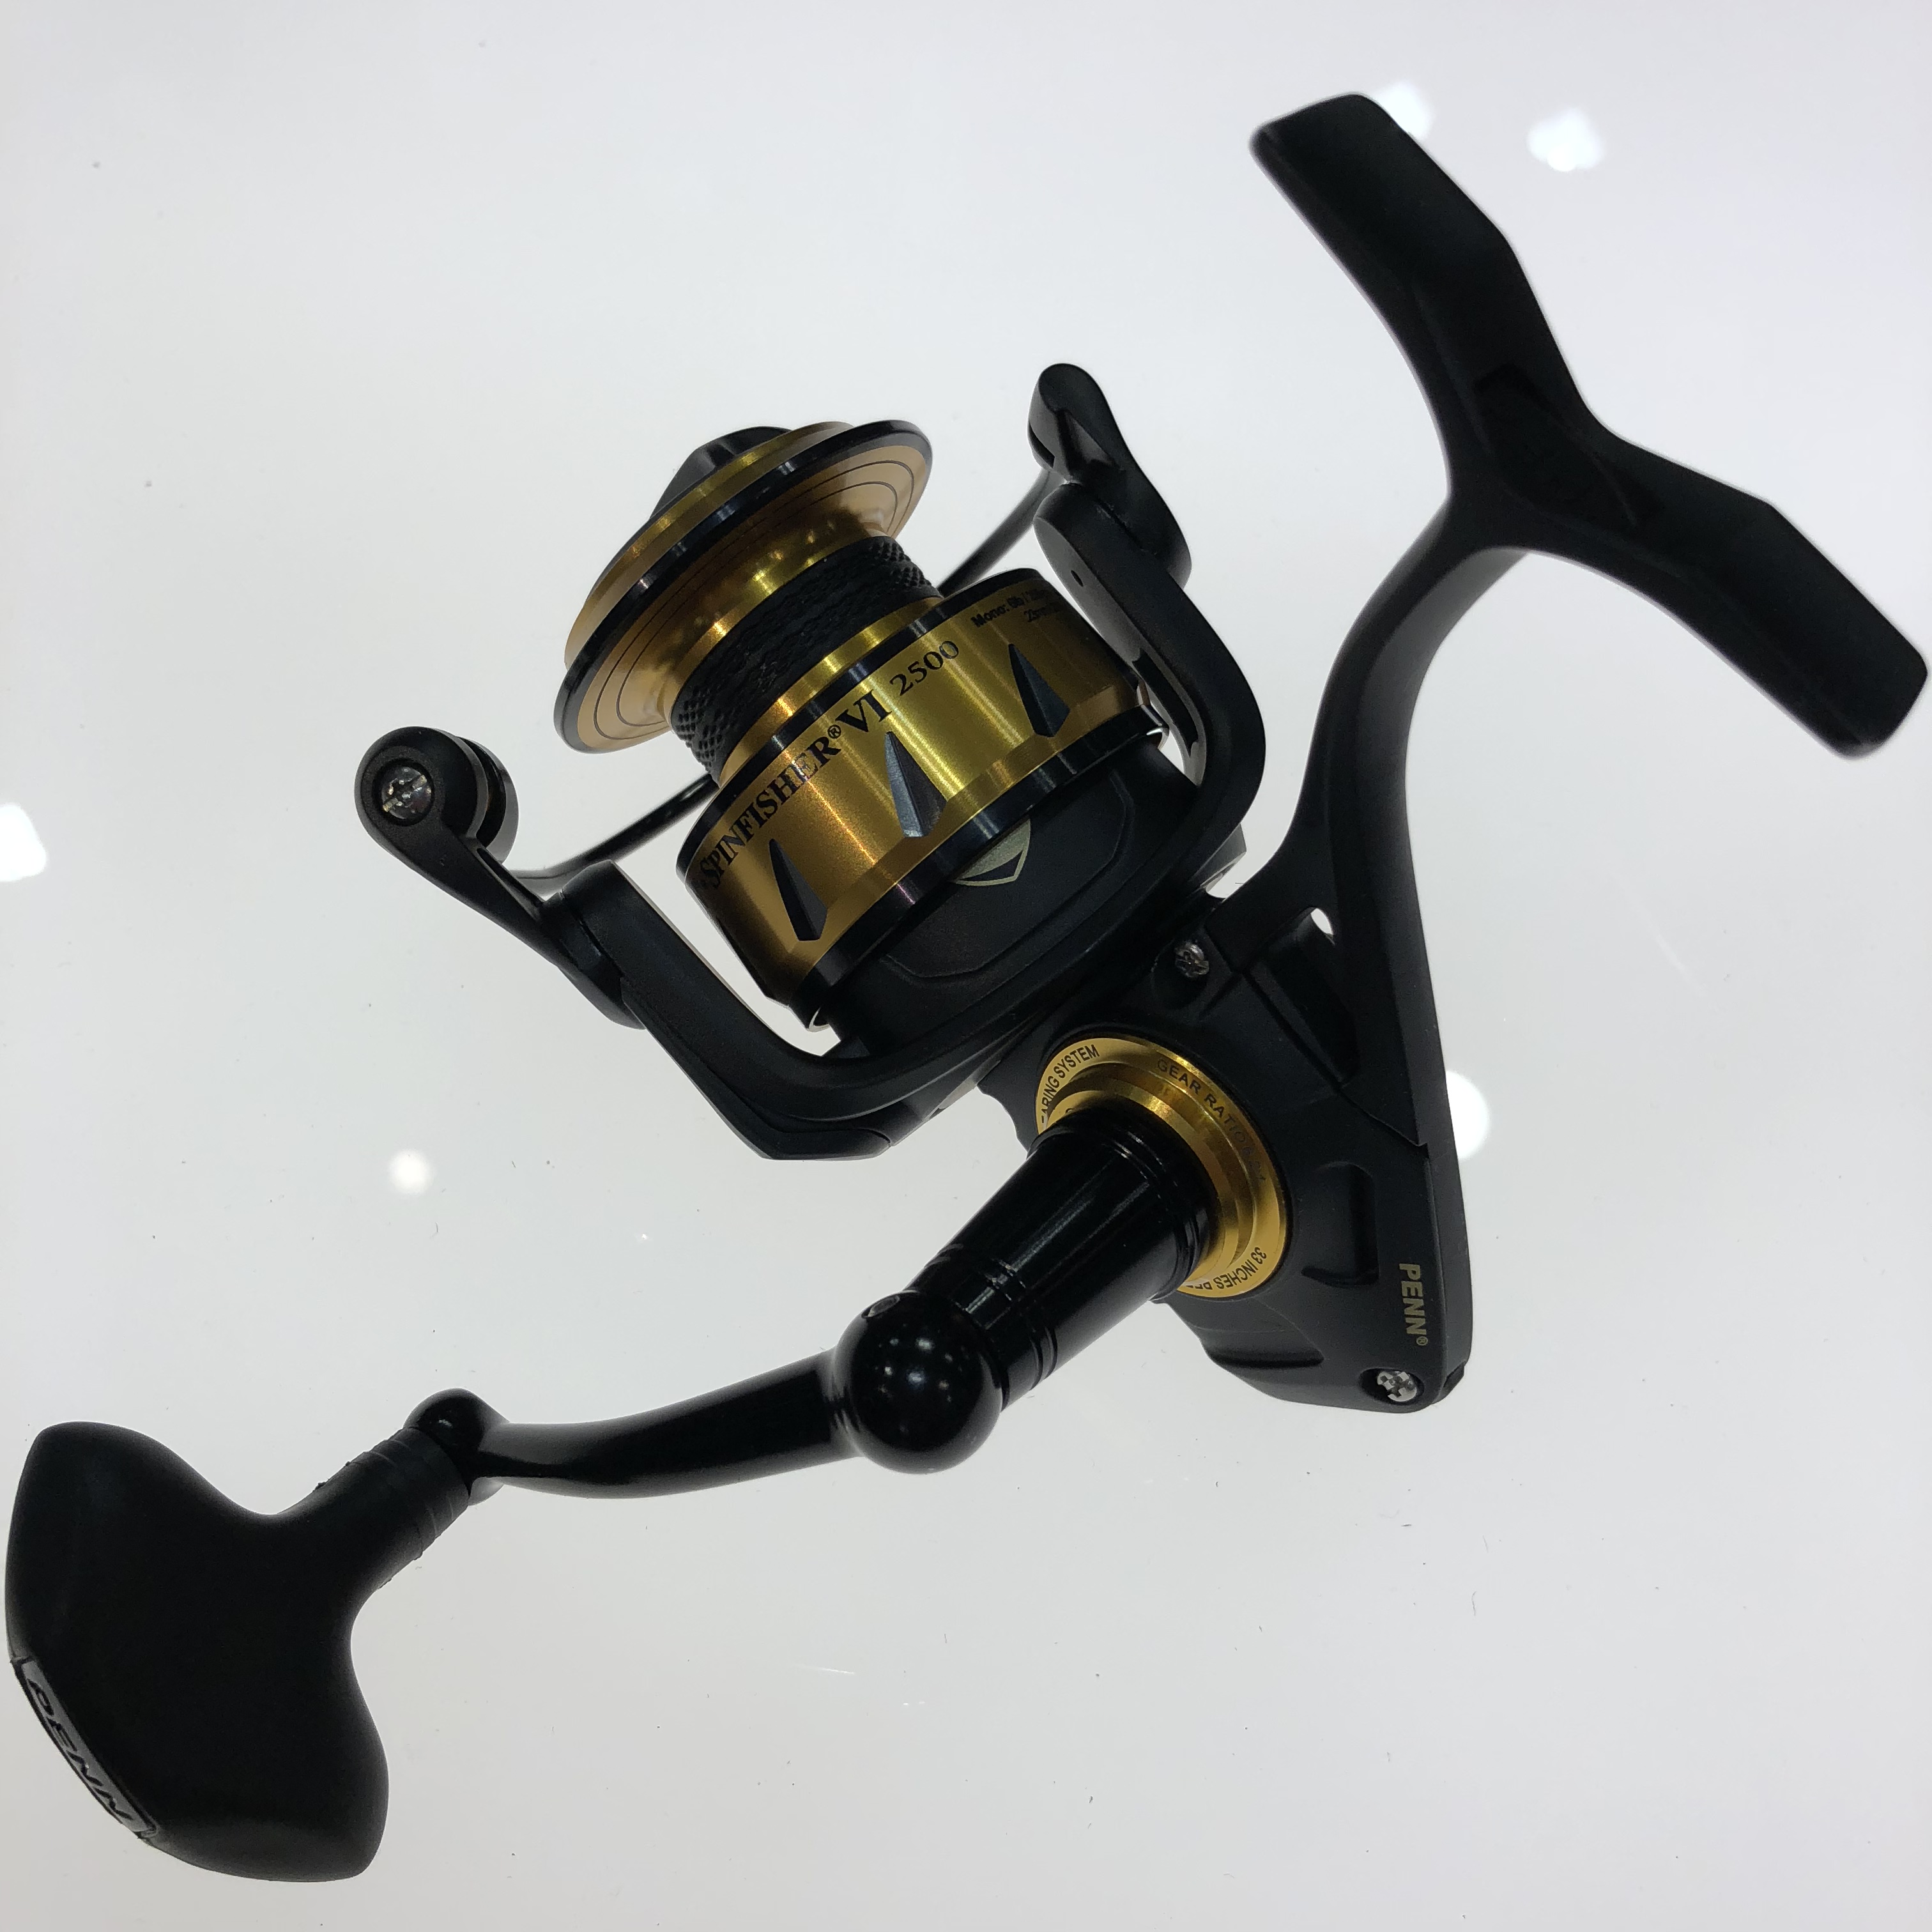 PENN Spinfisher VI Spinning Reel Review - Wrightsville Beach Fishing Report  with Capt. Jot Owens